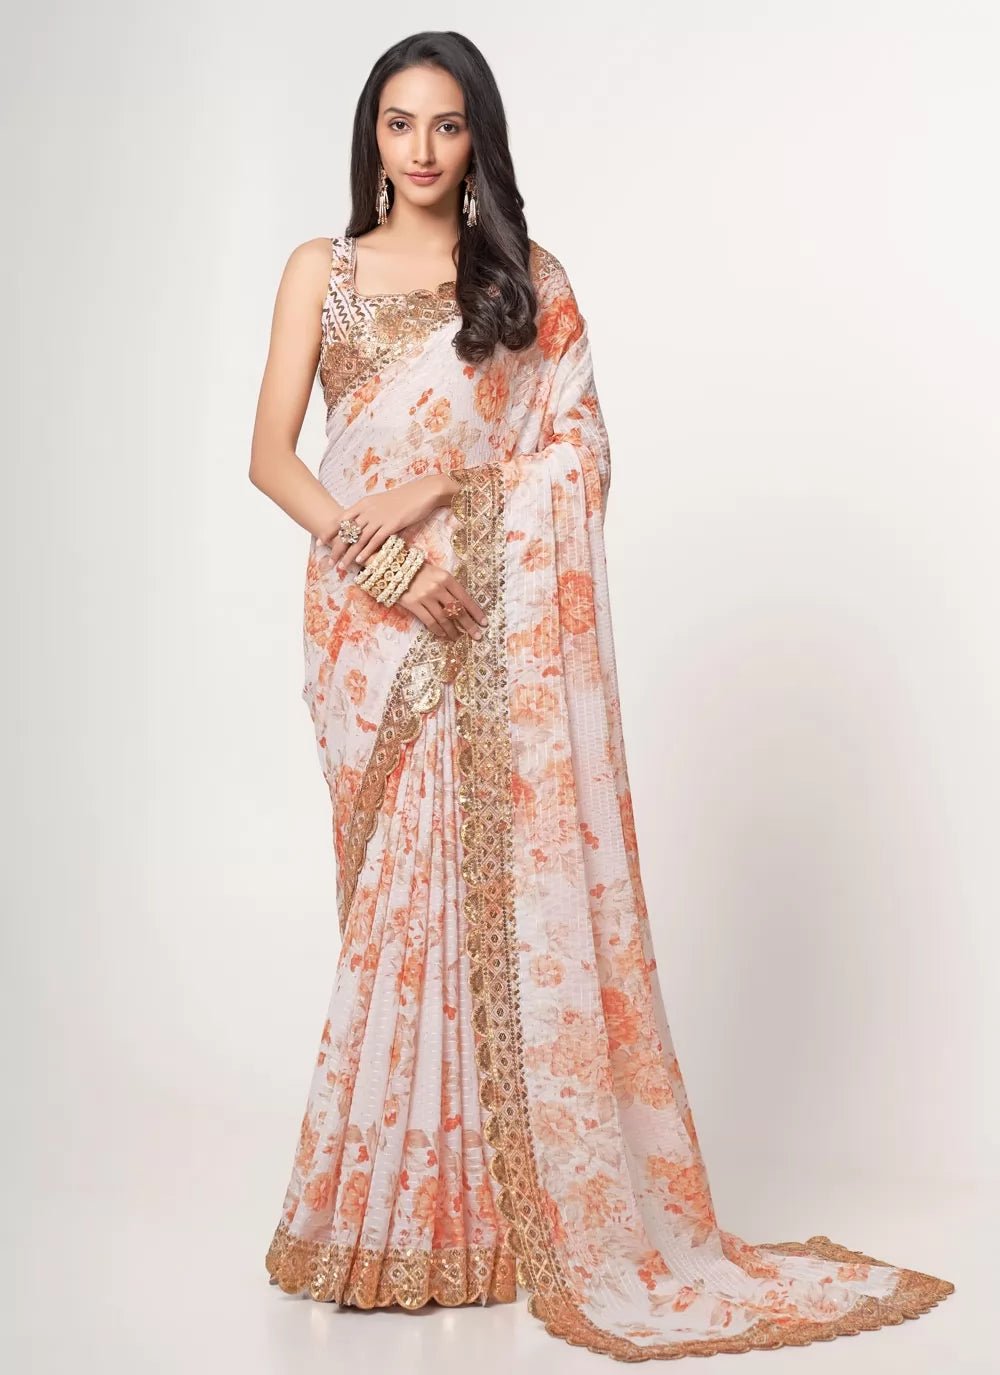 Gorgeous Off White Floral ZCS - Indian Dress House 786